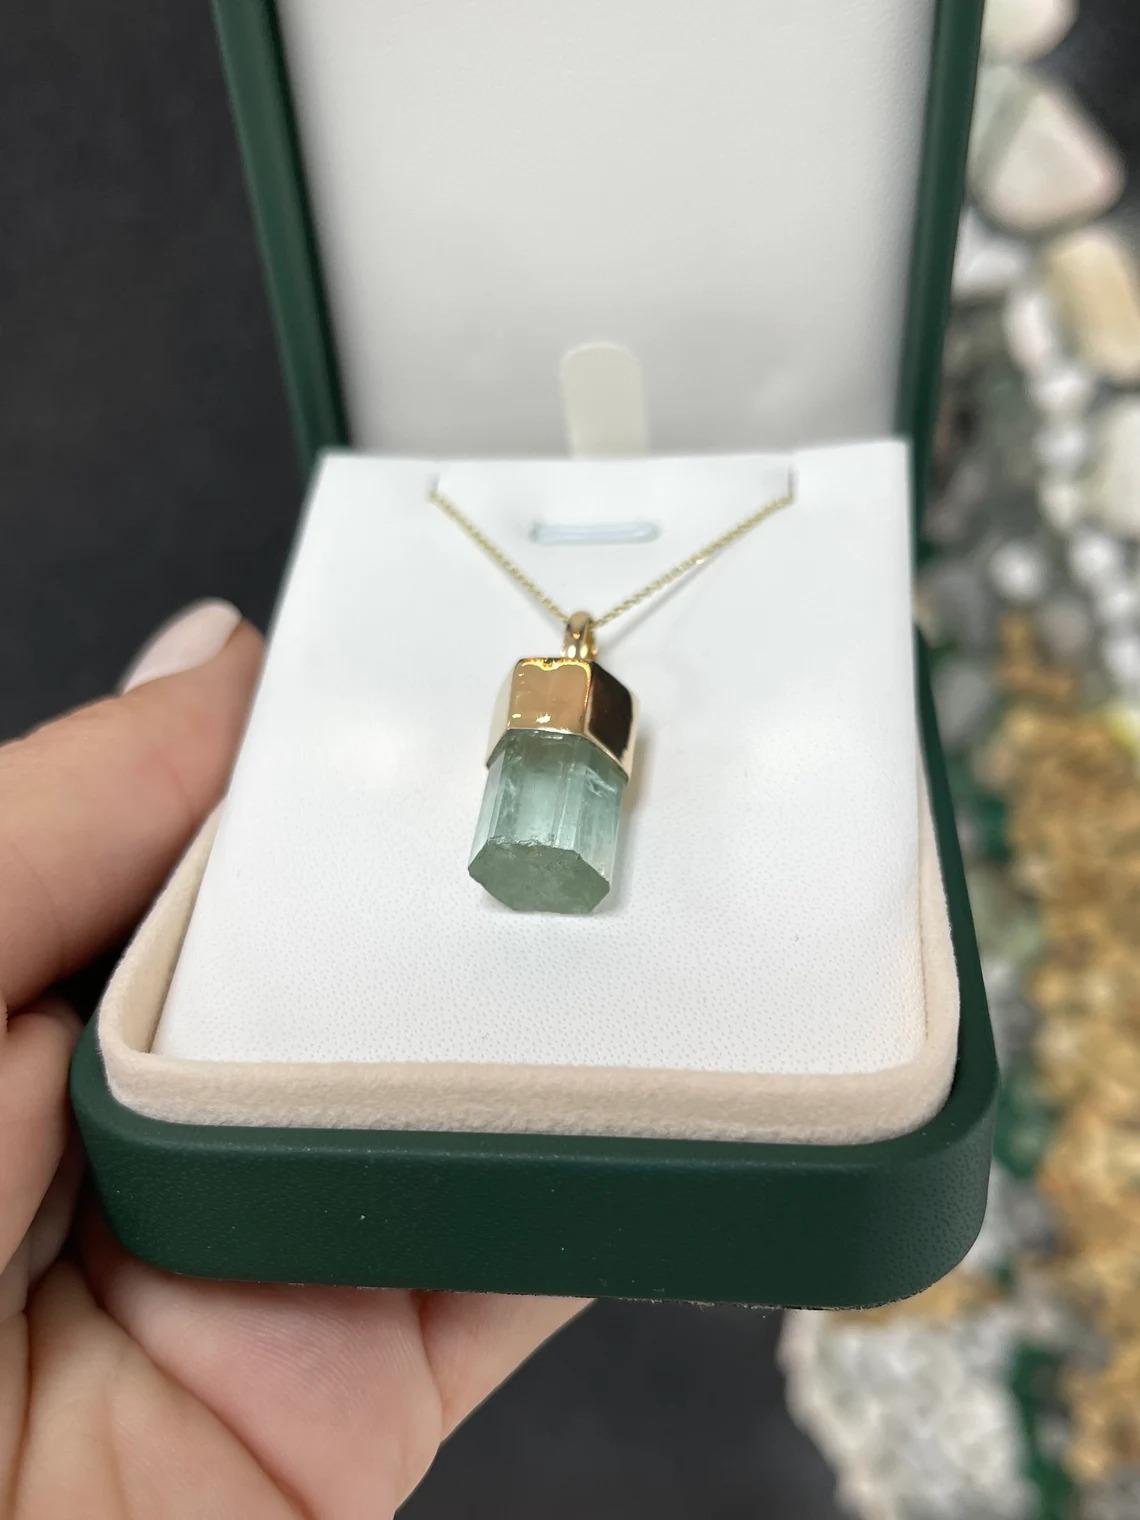 22.98ct 14K Natural Light Bluish Green Rough Crystal Emerald Pendant Necklace  For Sale 1